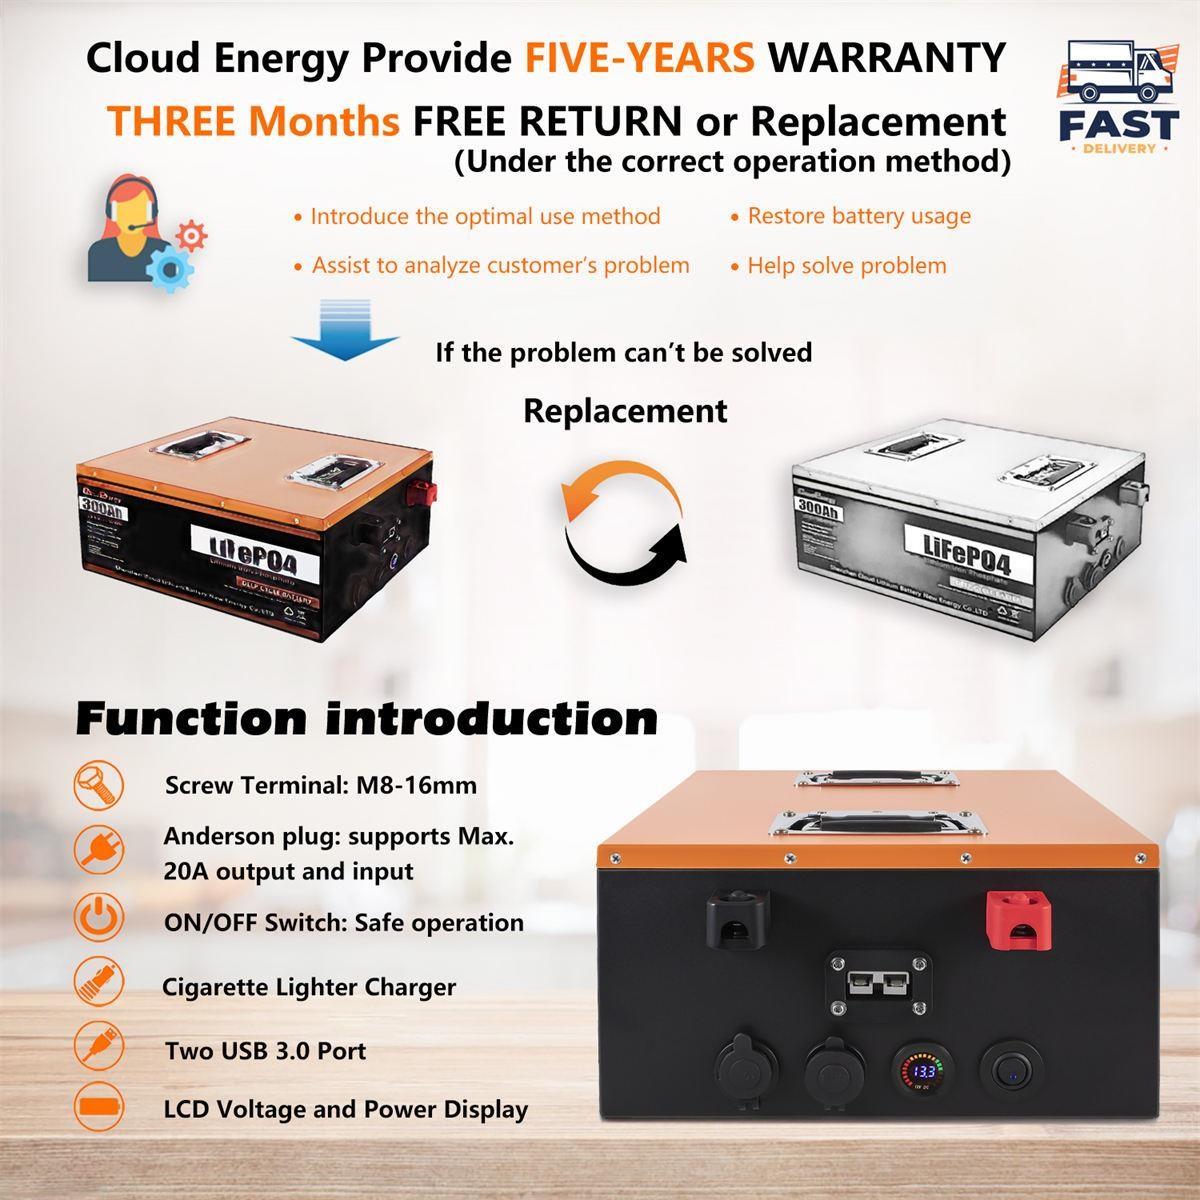 Cloudenergy 12V 300Ah LiFePO4 Battery Pack Backup Power, 3840Wh Energy, 6000 Cycles, Built-in 100A BMS